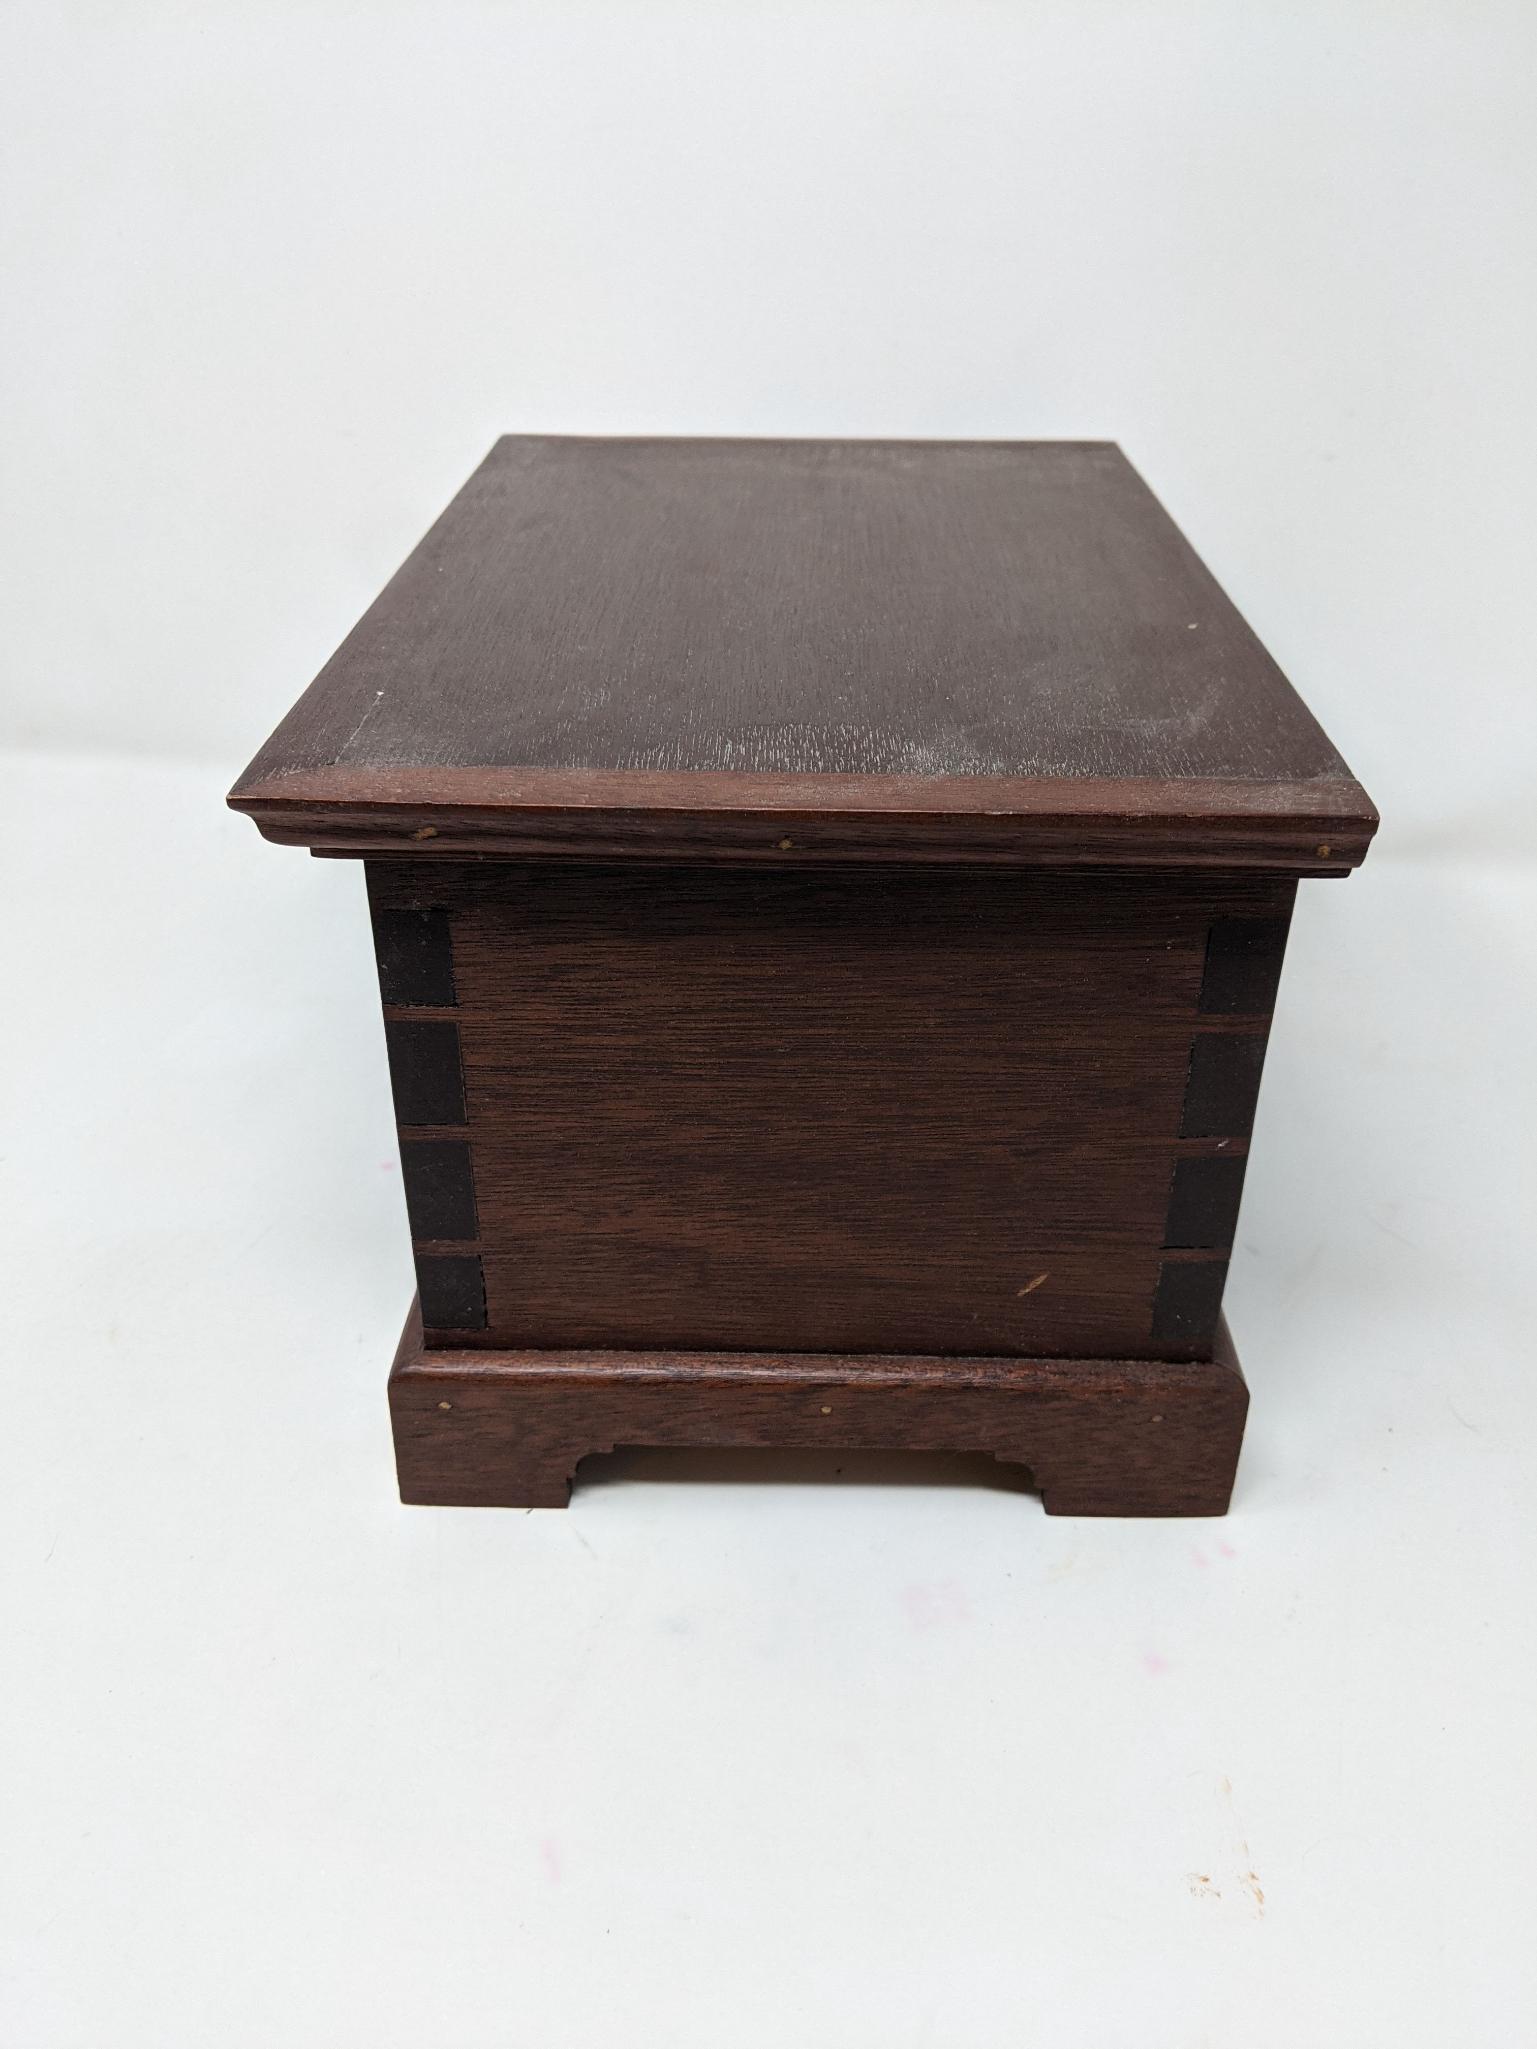 Dove-Tailed Wooden Box with Key